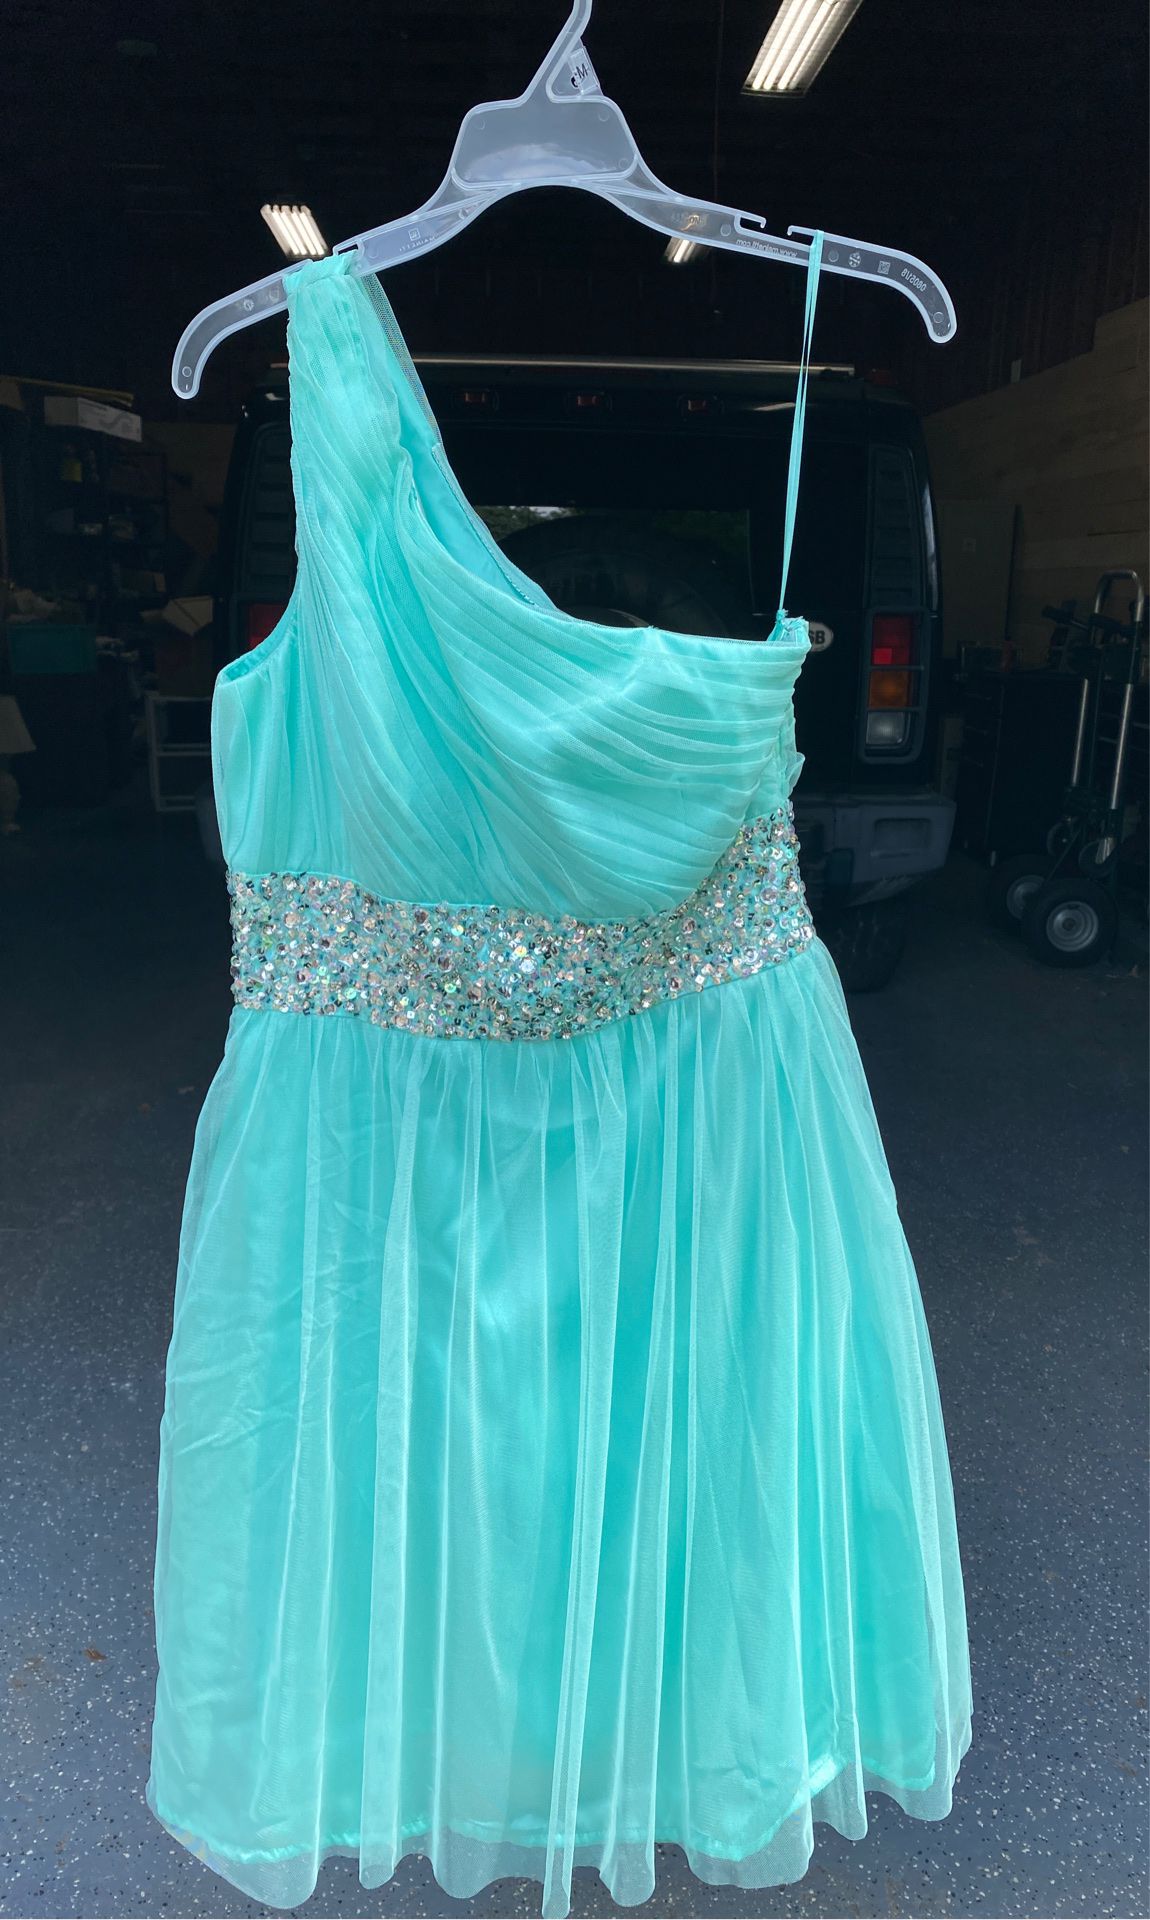 NWOT never worn Tiffany Blue with jewels dress